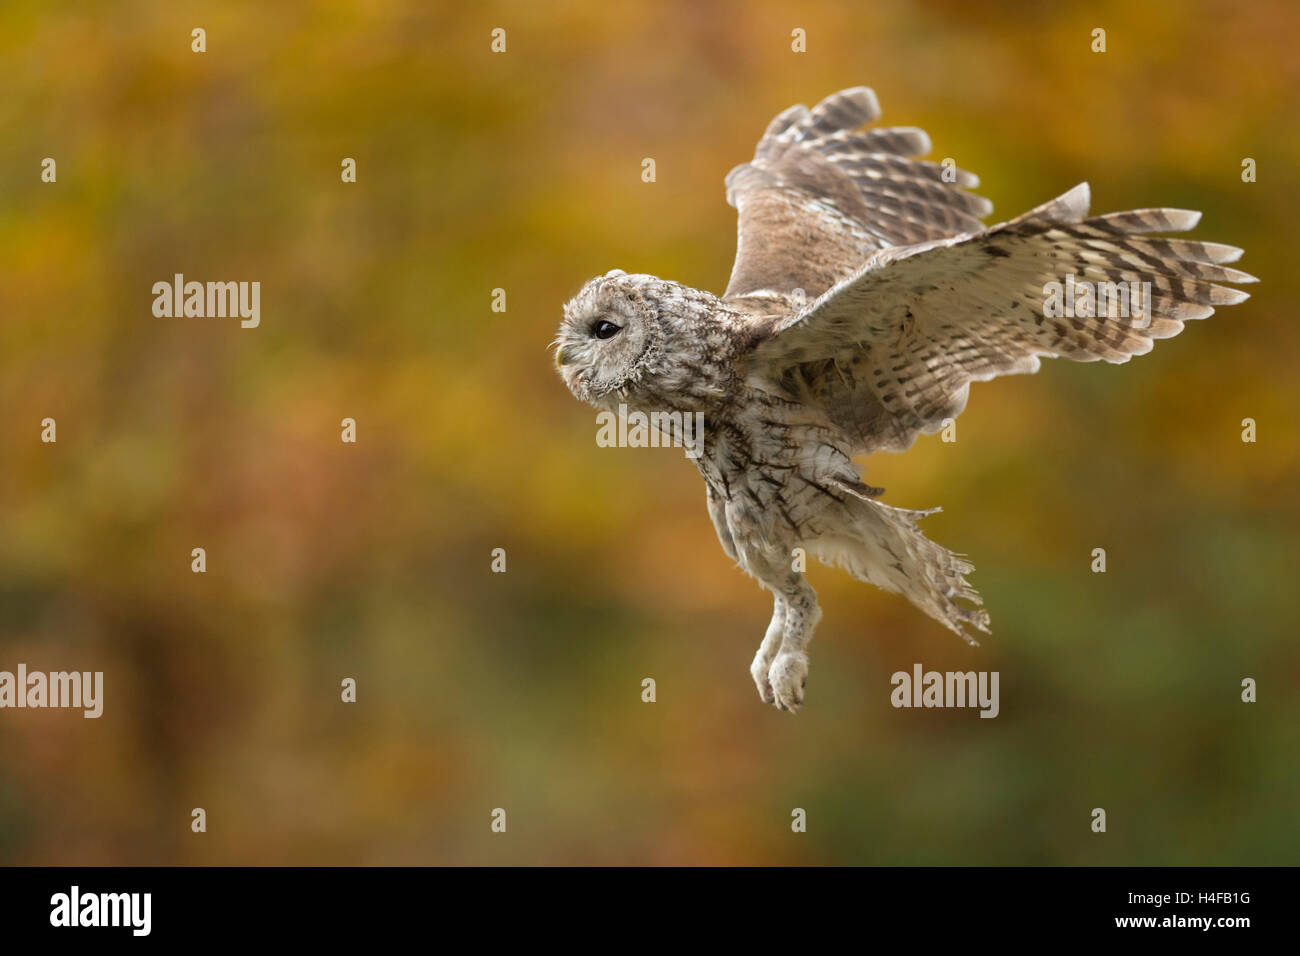 Tawny Owl / Waldkauz ( Strix aluco ) in flight, flying in front of an autumnal colored background, side view, close up. Stock Photo